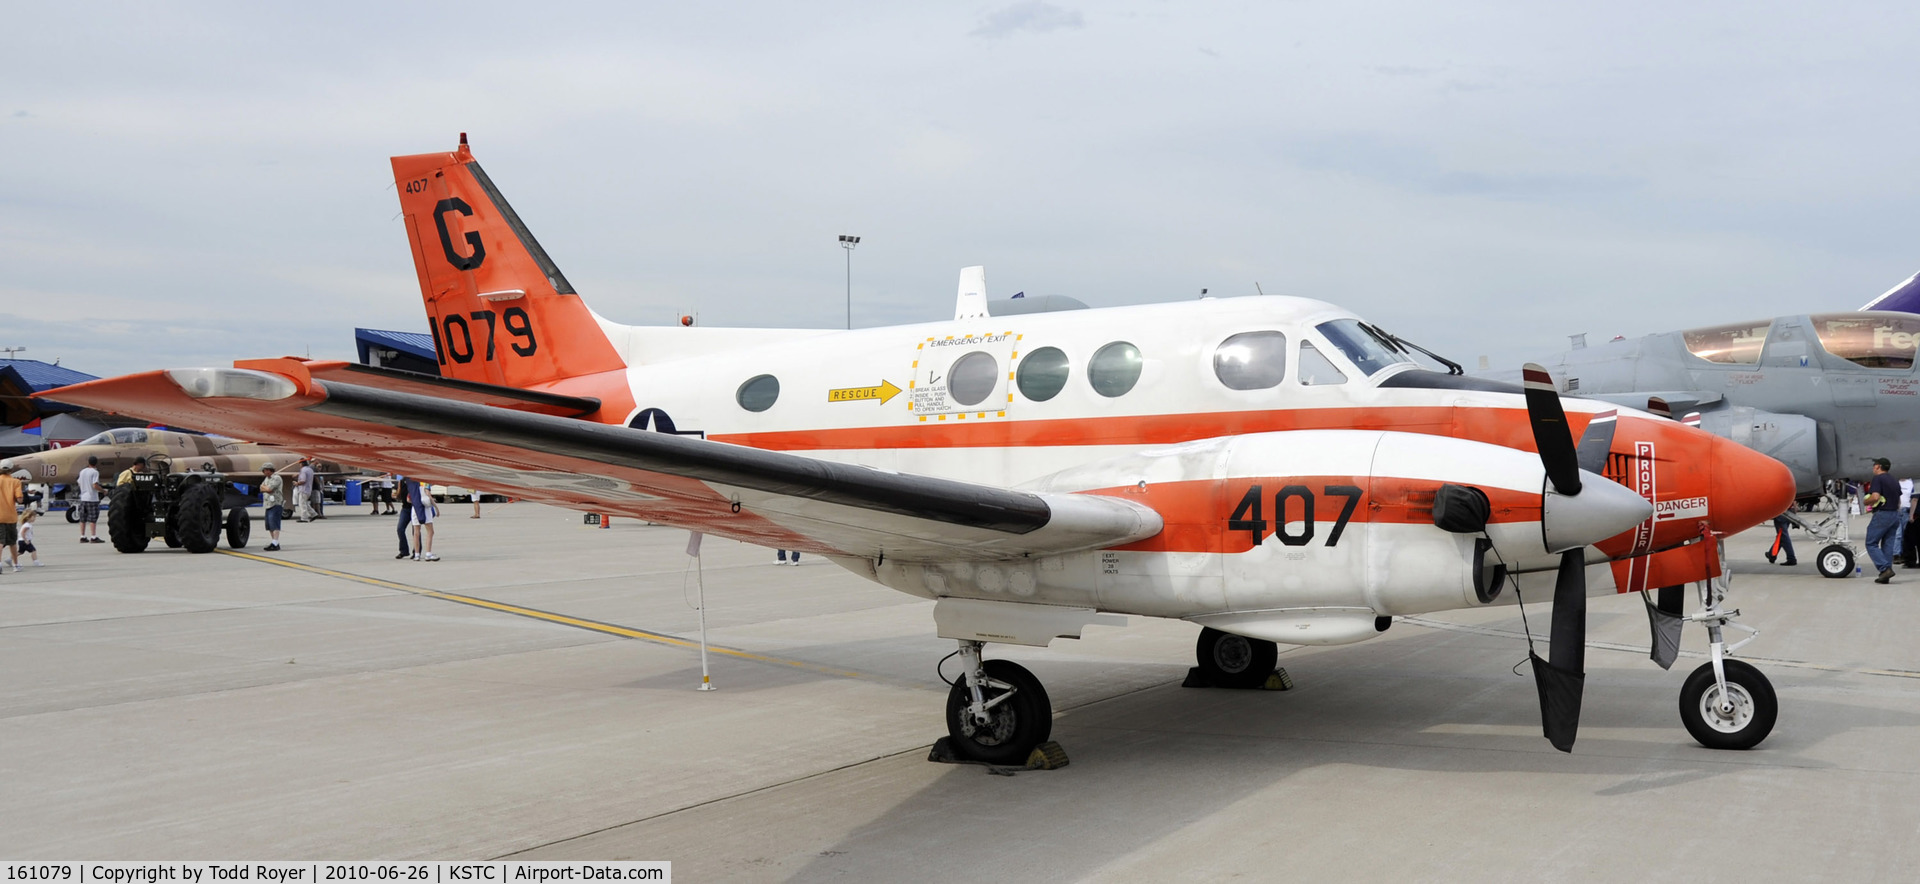 161079, Beechcraft T-44A Pegasus C/N LL-61, on display at the 2010 Great Minnesota Air Show